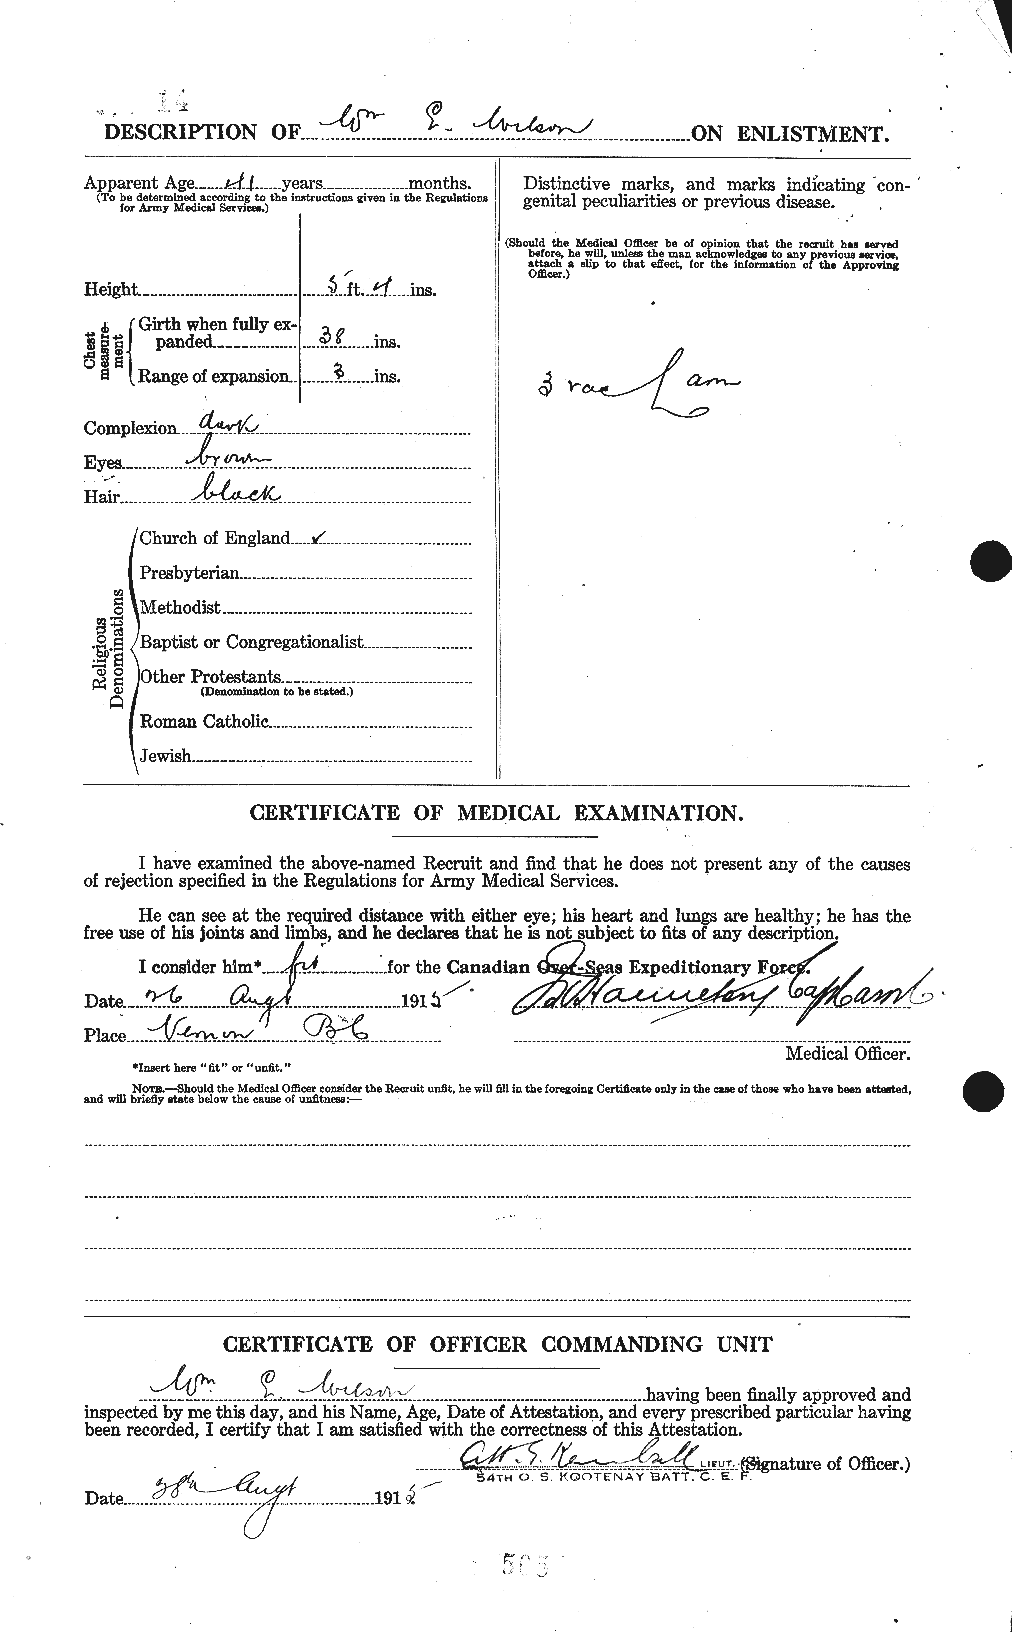 Personnel Records of the First World War - CEF 681984b